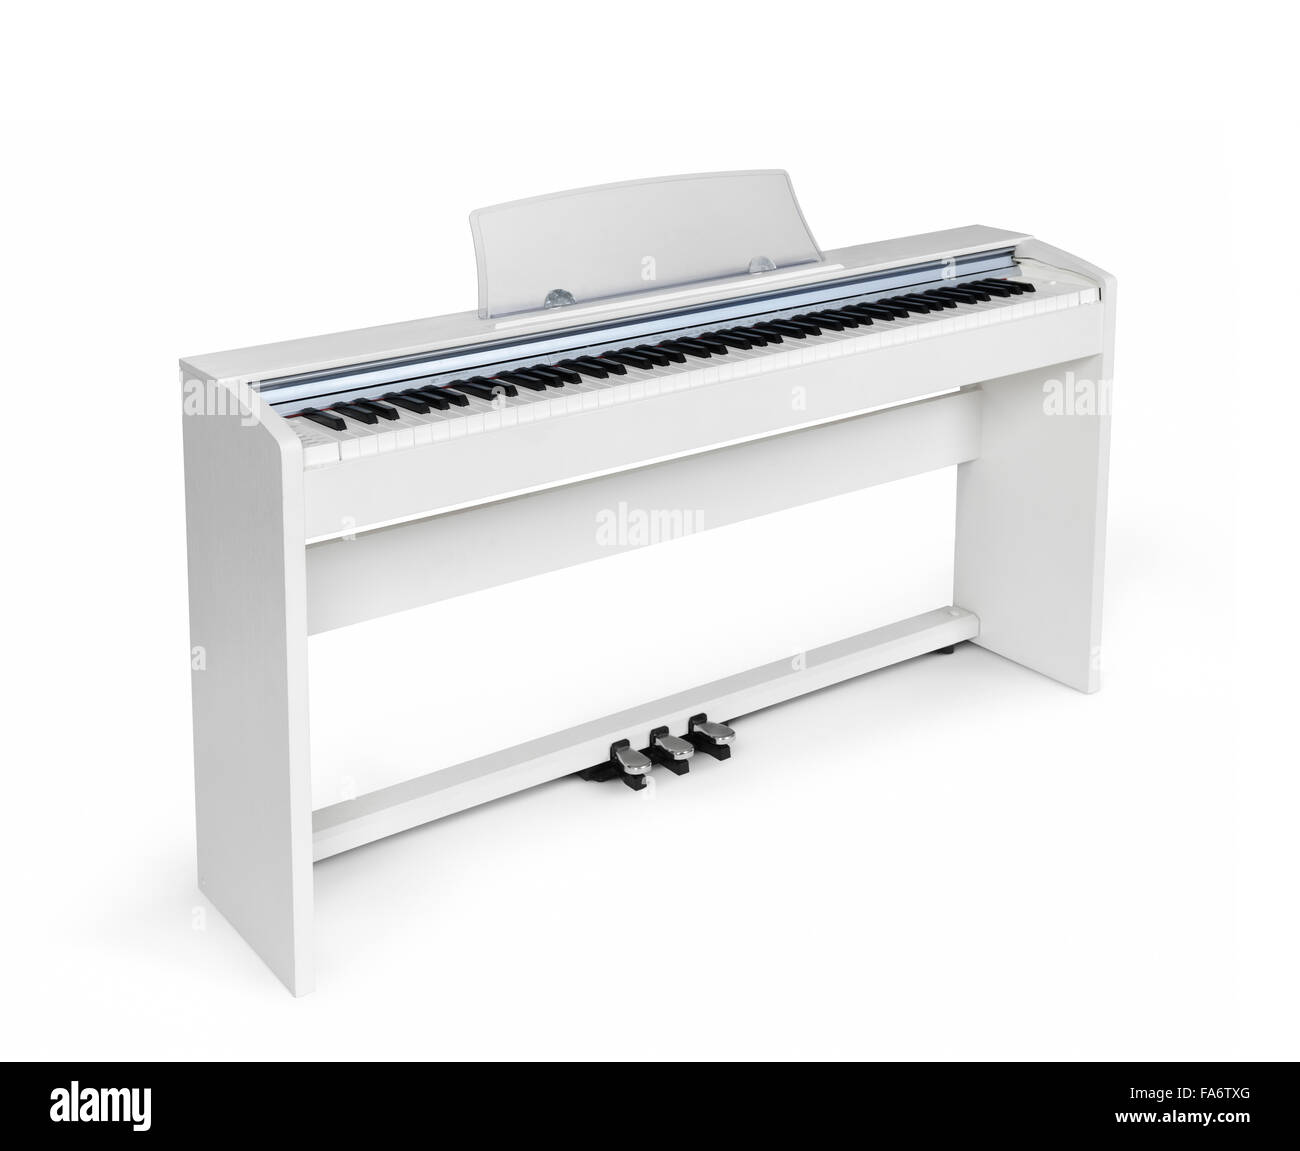 White upright digital piano in isolated on white background with clipping path Stock Photo